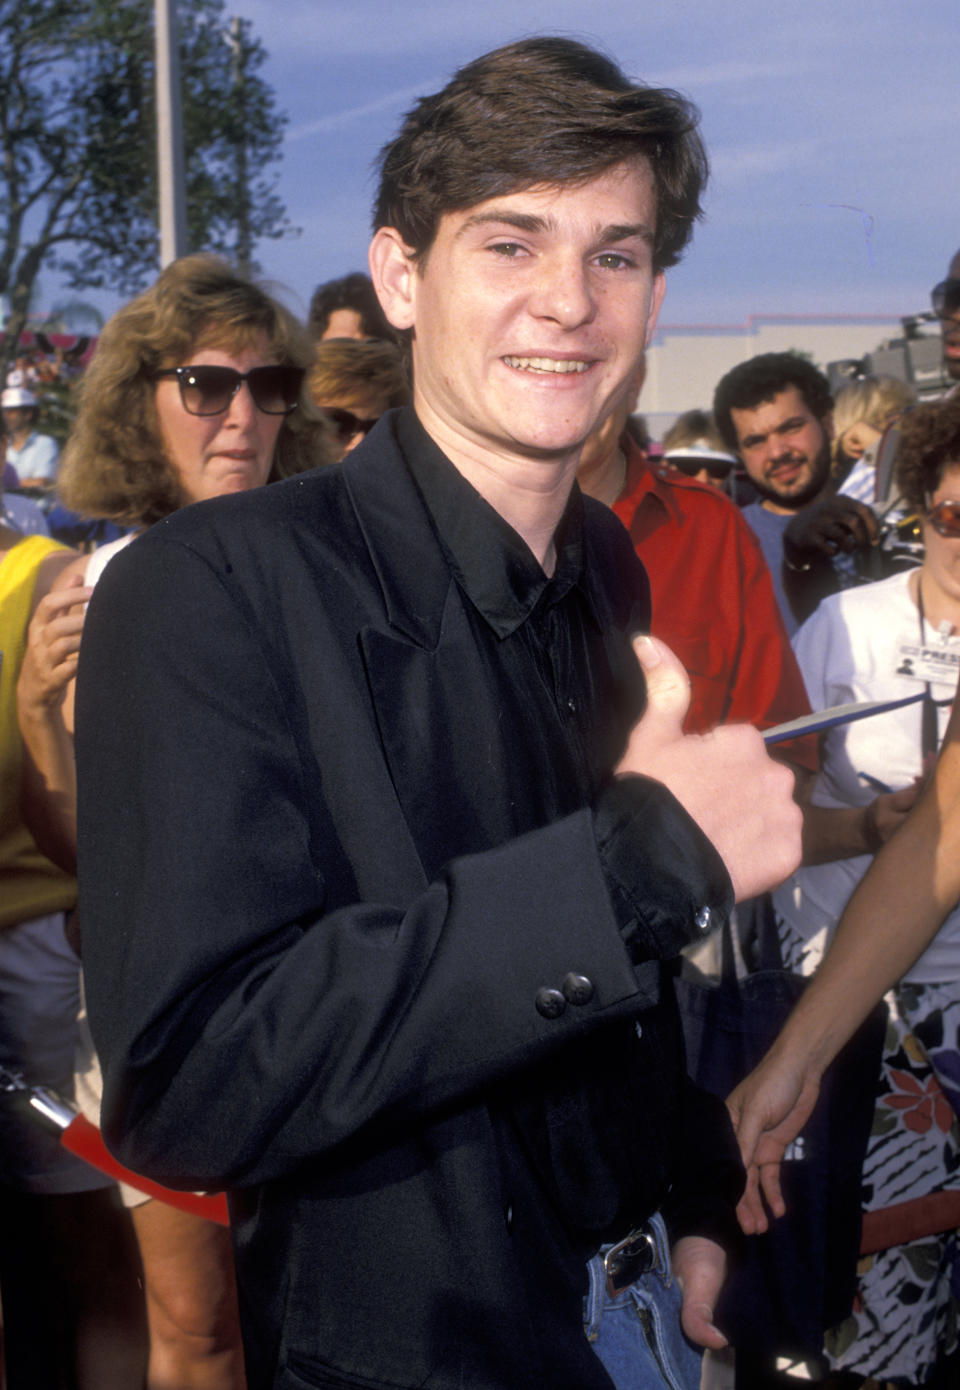 Actor Henry Thomas attends the Grand Opening of the New Universal Studios Florida Theme Park Attractions on June 7, 1990 at Universal Studios Florida in Orlando, Florida. (Photo by Ron Galella, Ltd./Ron Galella Collection via Getty Images)